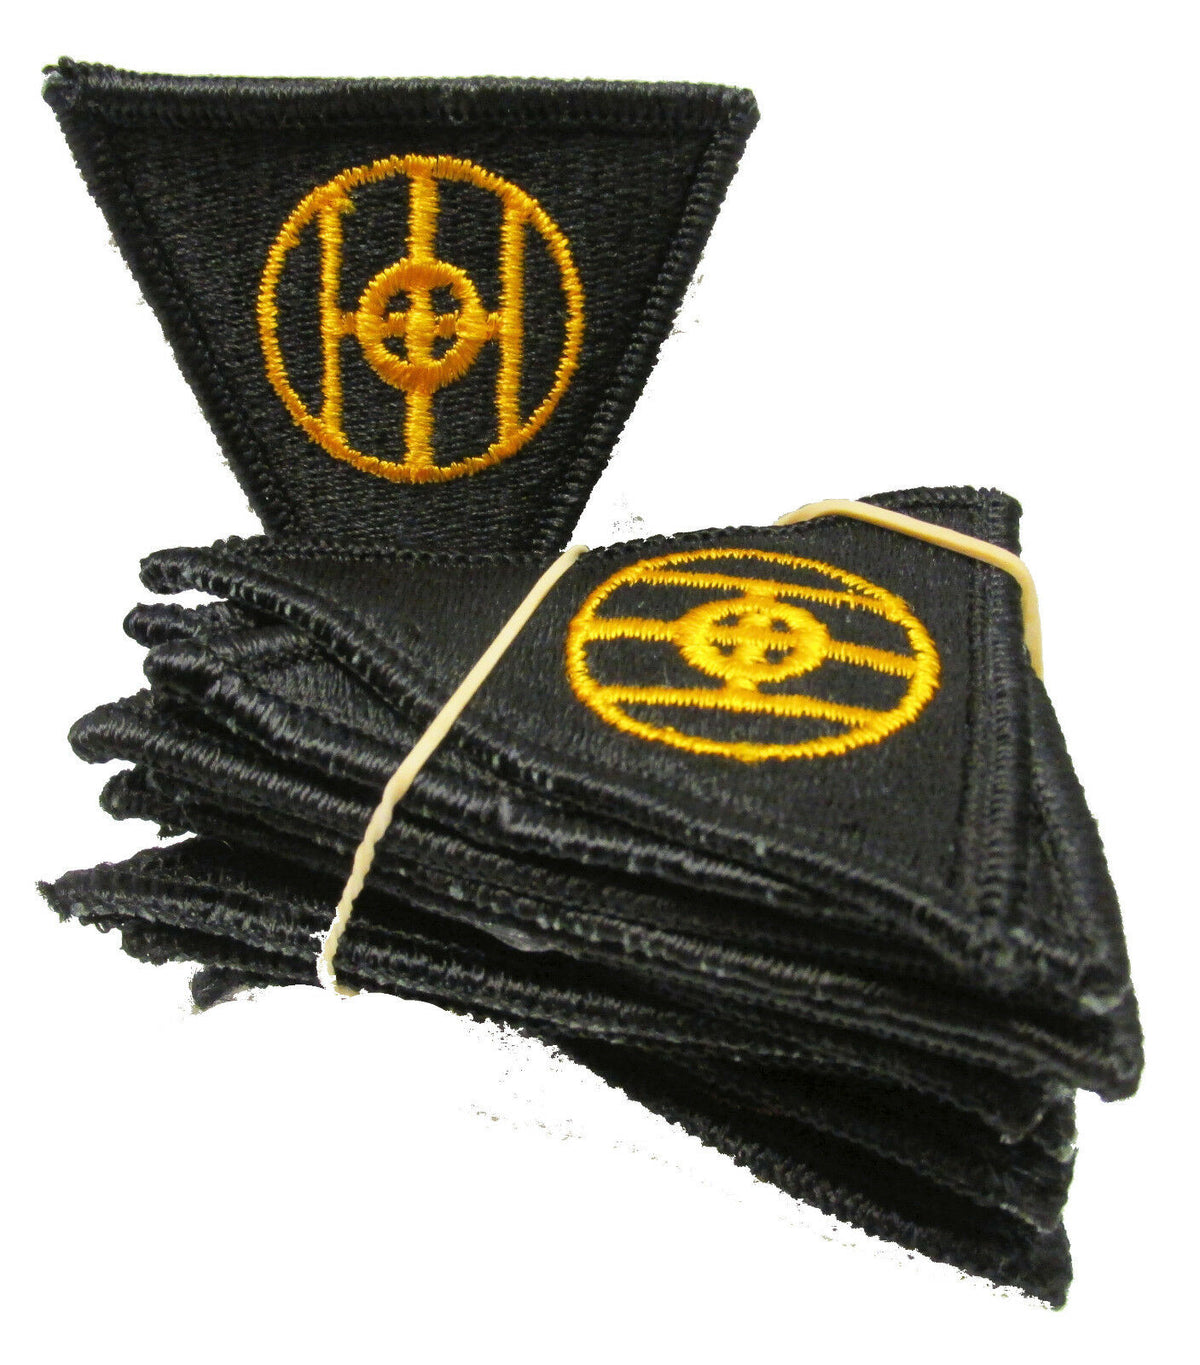 Lot of 10 - 1970s Vintage Military Surplus - 83rd Army Reserve Command Patch